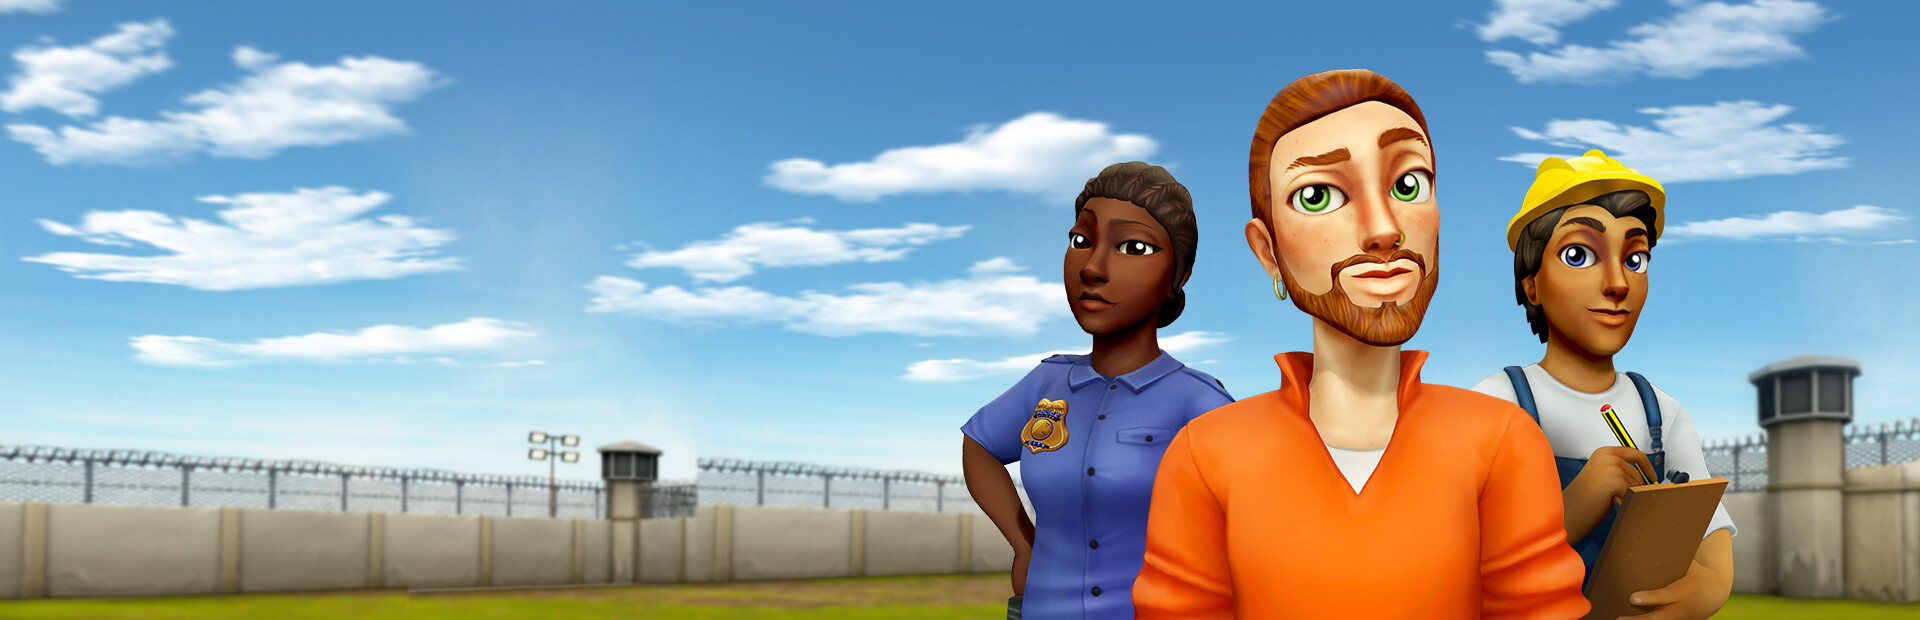 Prison Tycoon®: Under New Management cover image